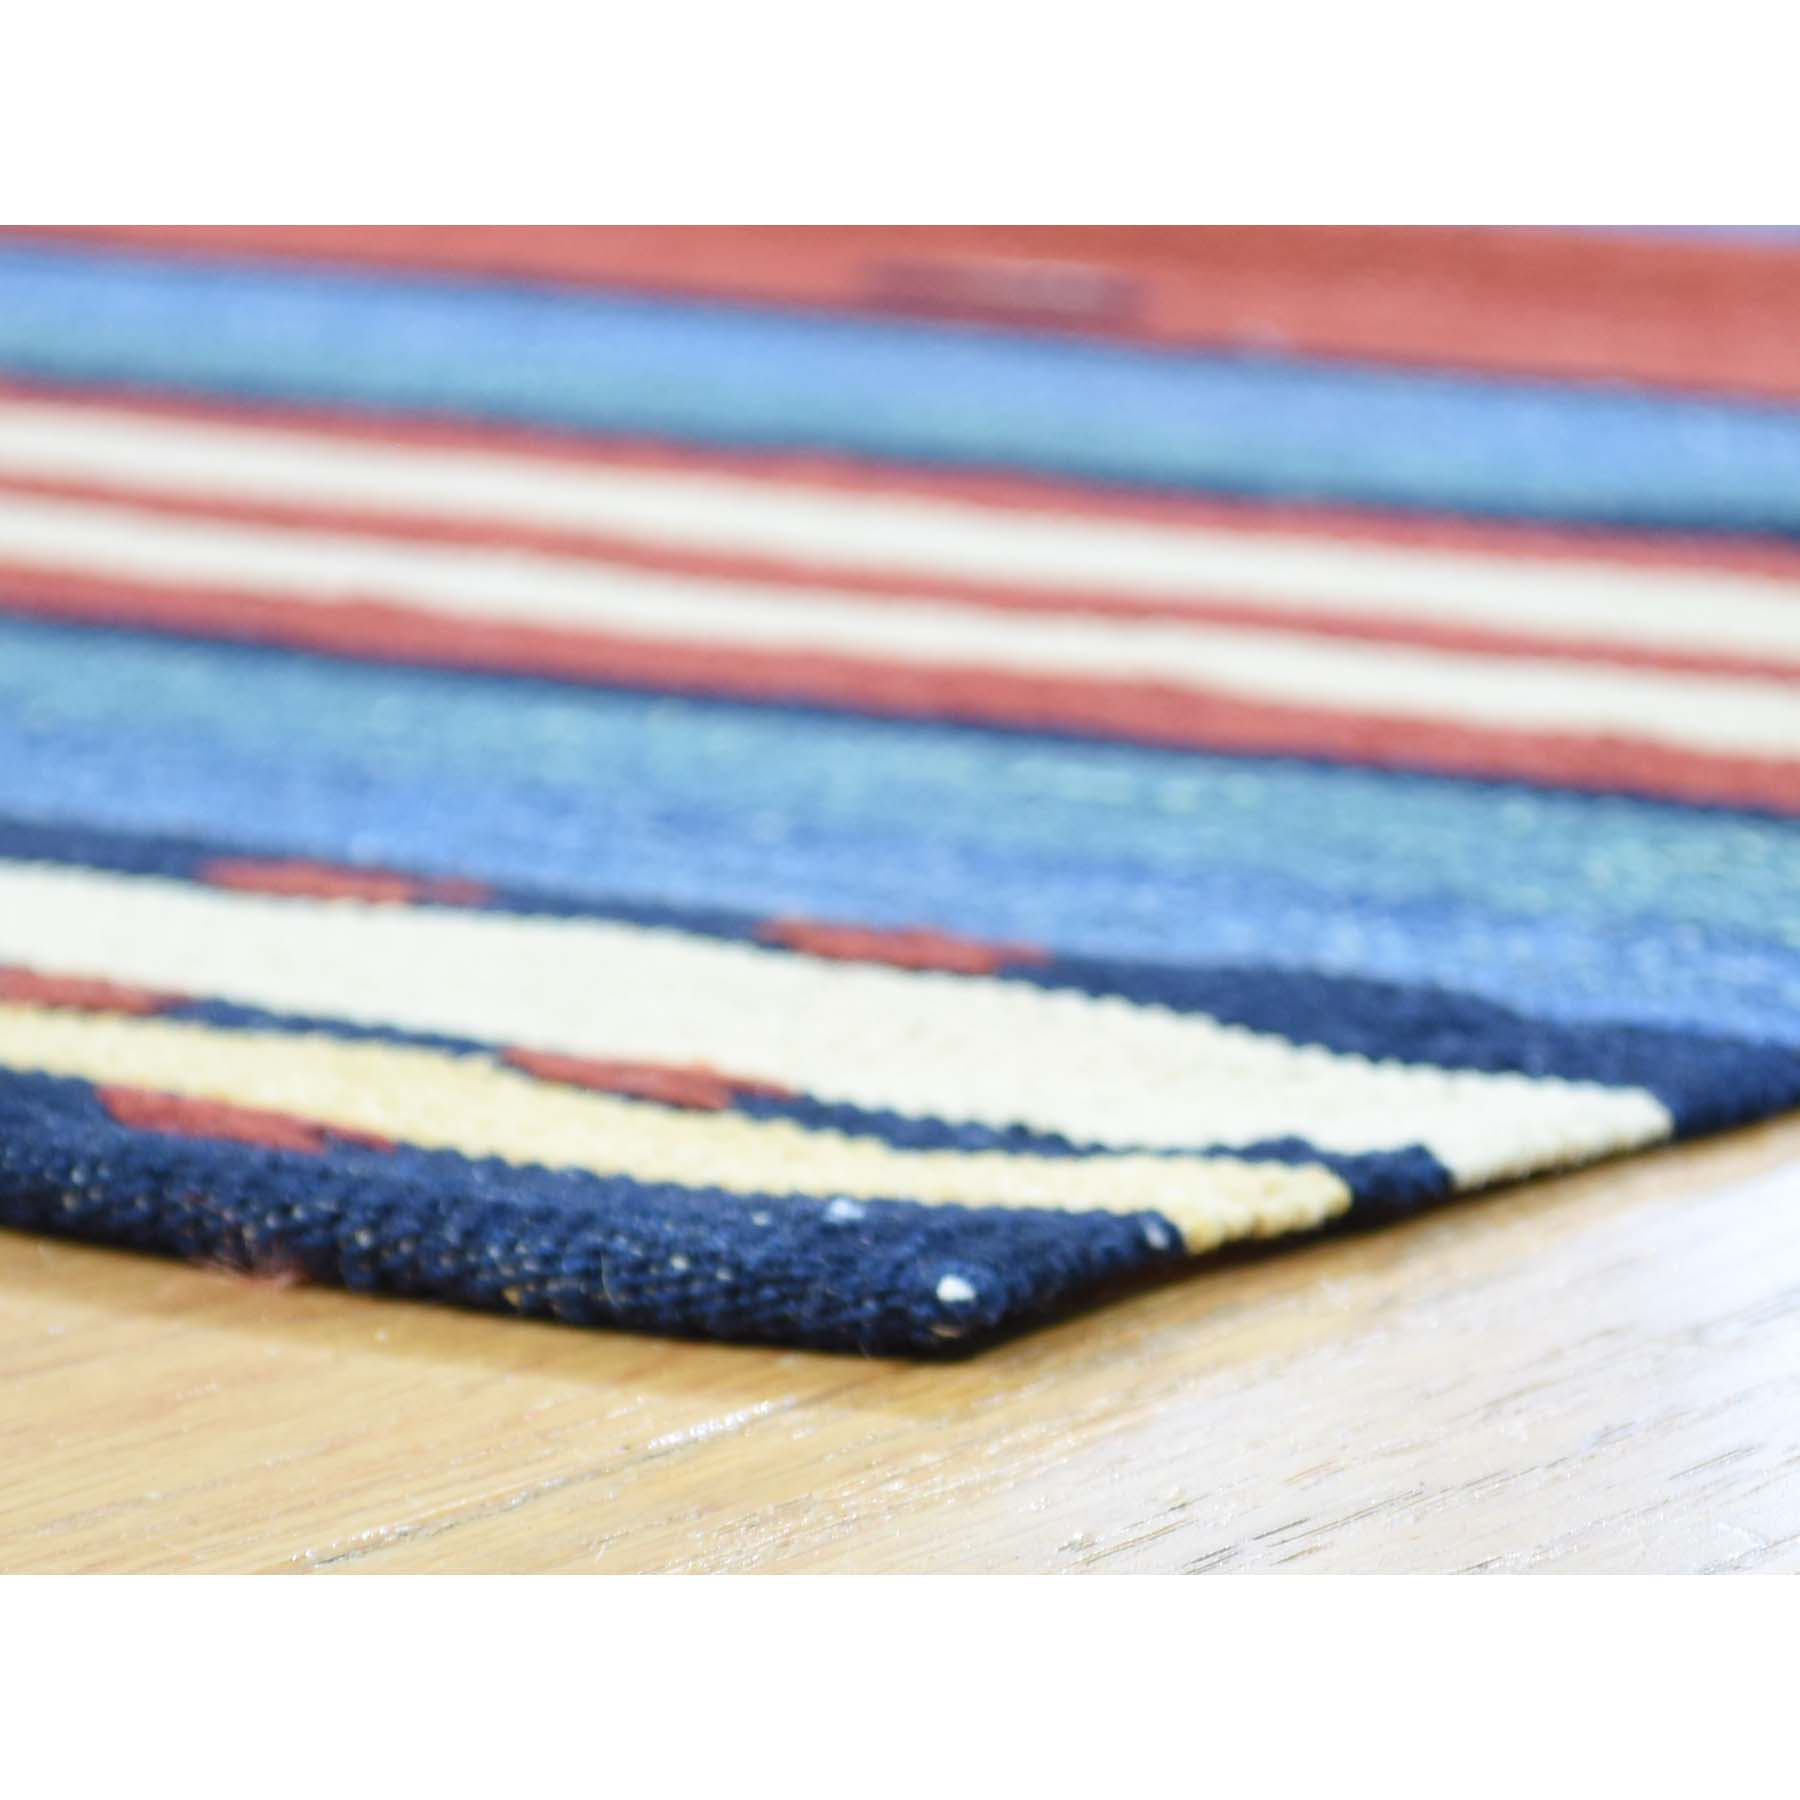 8-7 x10-3  Hand-Woven Durie Kilim Flat Weave Pure Wool Striped Rug 